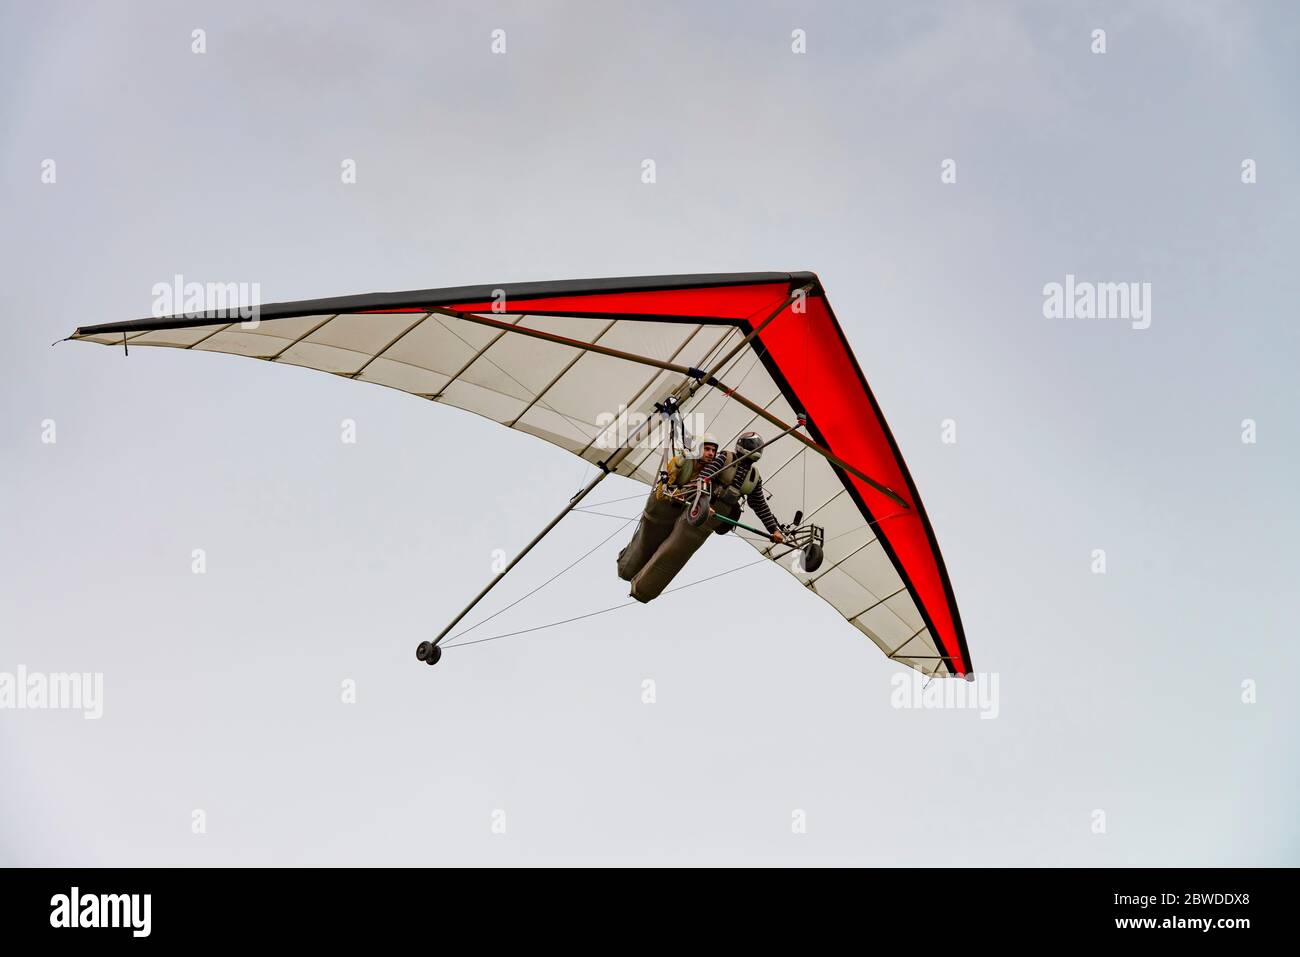 2020-05-24, Fasova, Ukraine. Learning to fly on a hang glider. Tandem hang glider with pilot and passenger. Stock Photo